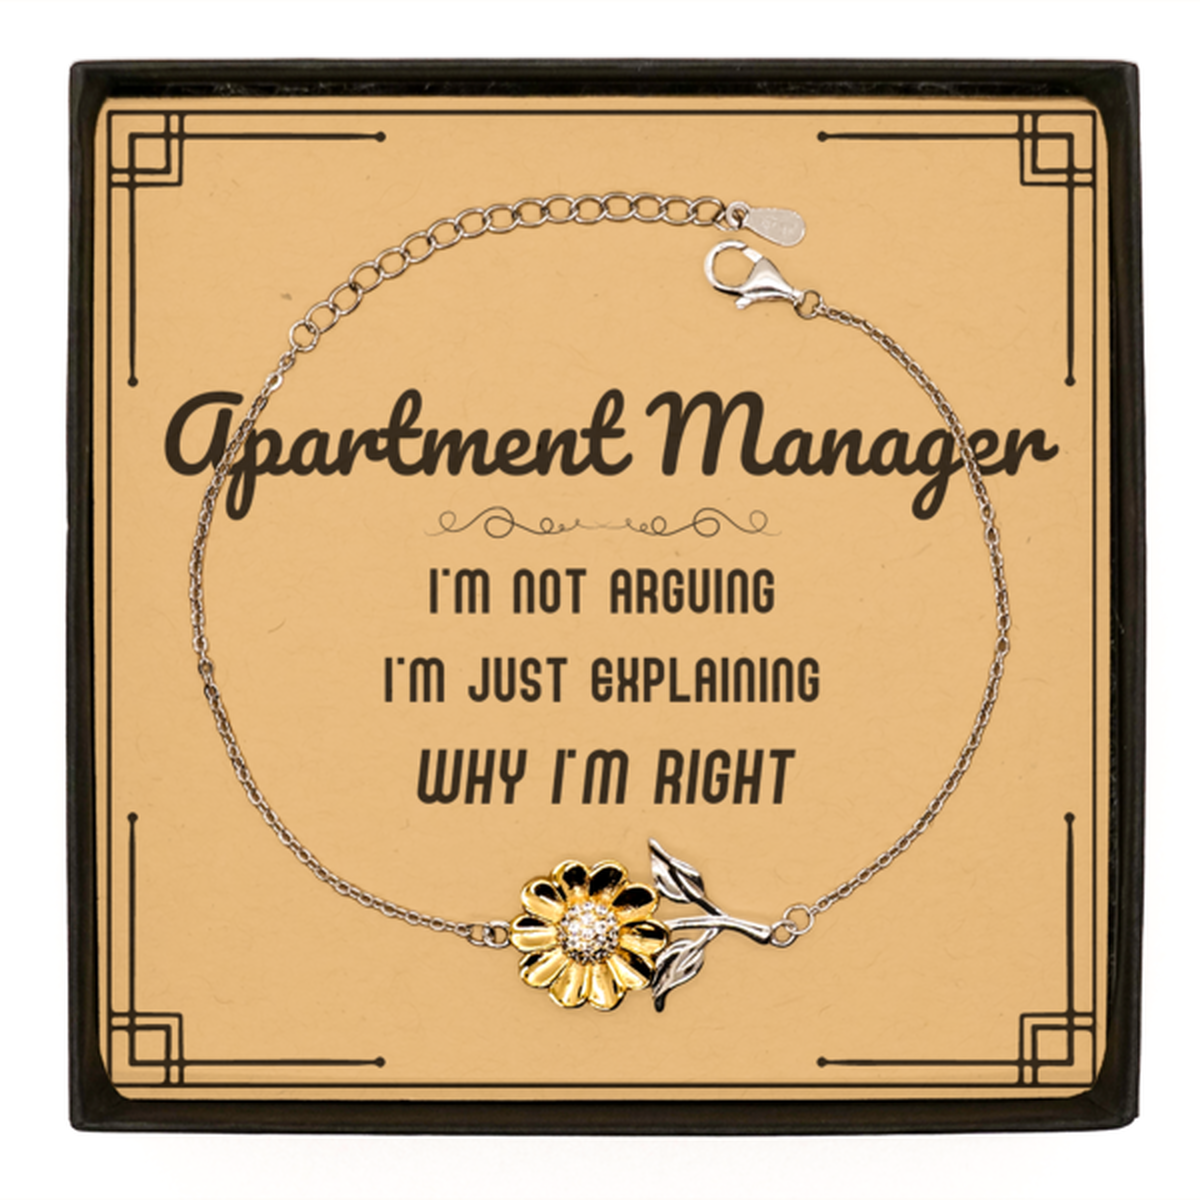 Apartment Manager I'm not Arguing. I'm Just Explaining Why I'm RIGHT Sunflower Bracelet, Funny Saying Quote Apartment Manager Gifts For Apartment Manager Message Card Graduation Birthday Christmas Gifts for Men Women Coworker